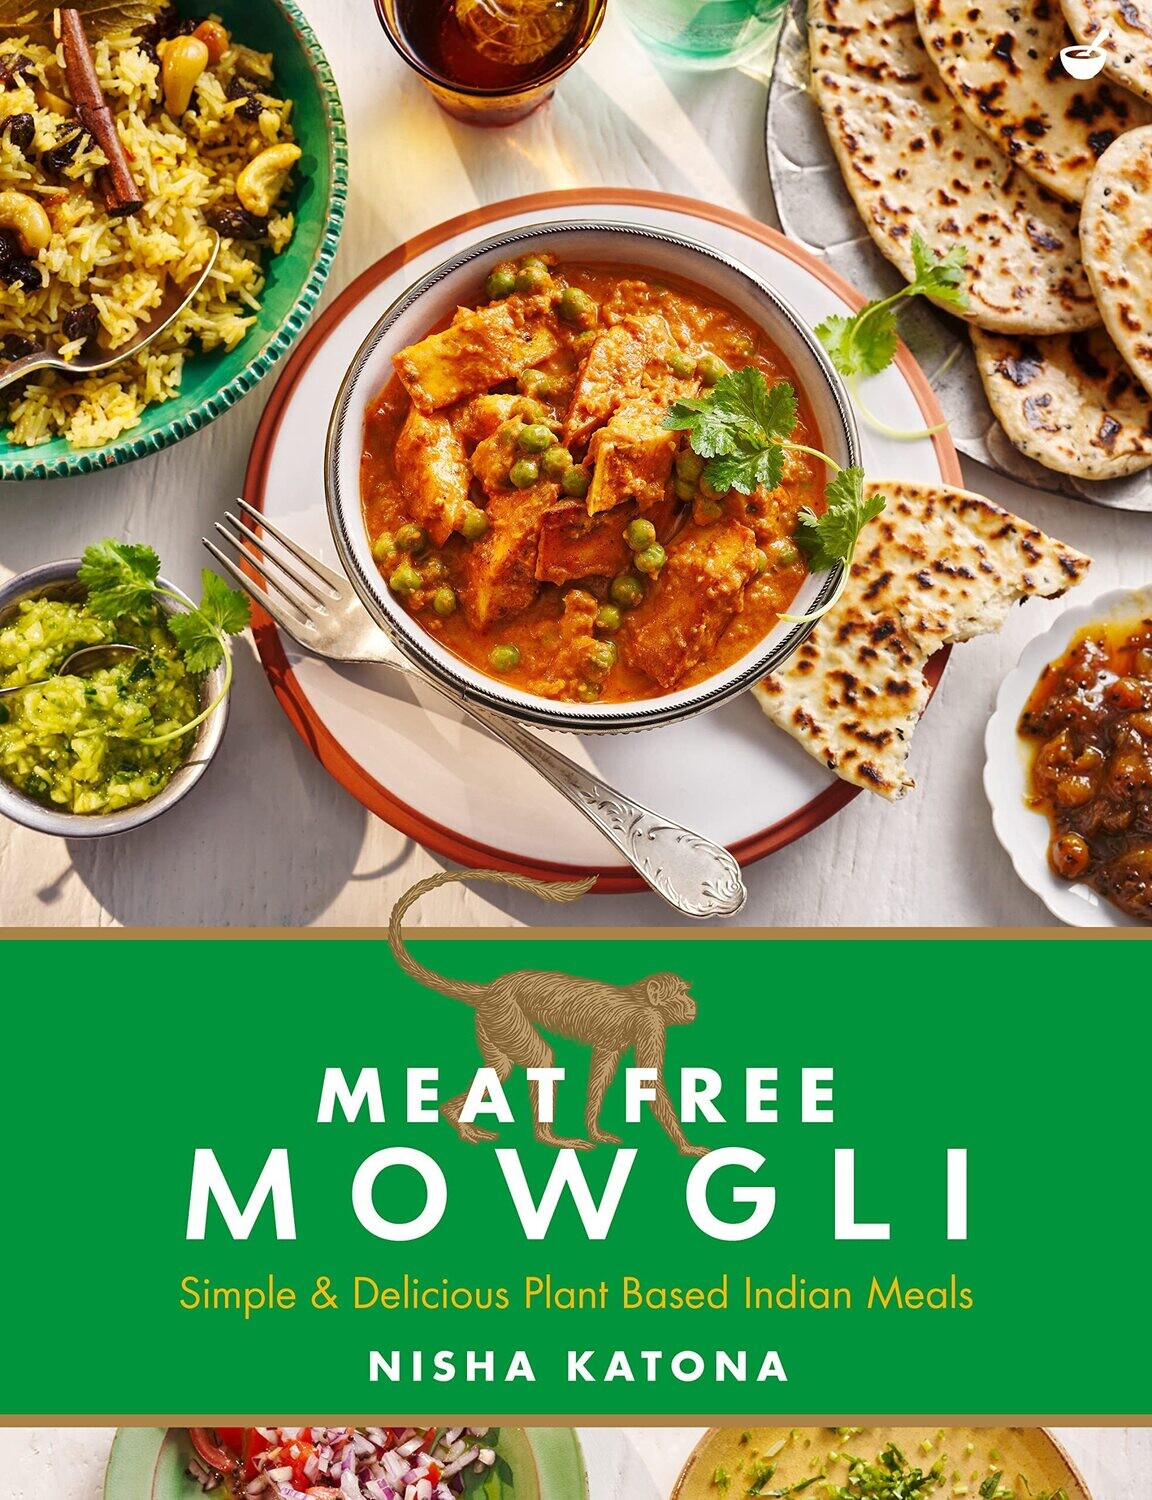 Meat Free Mowgli: Simple & Delicious Plant-Based Indian Meals